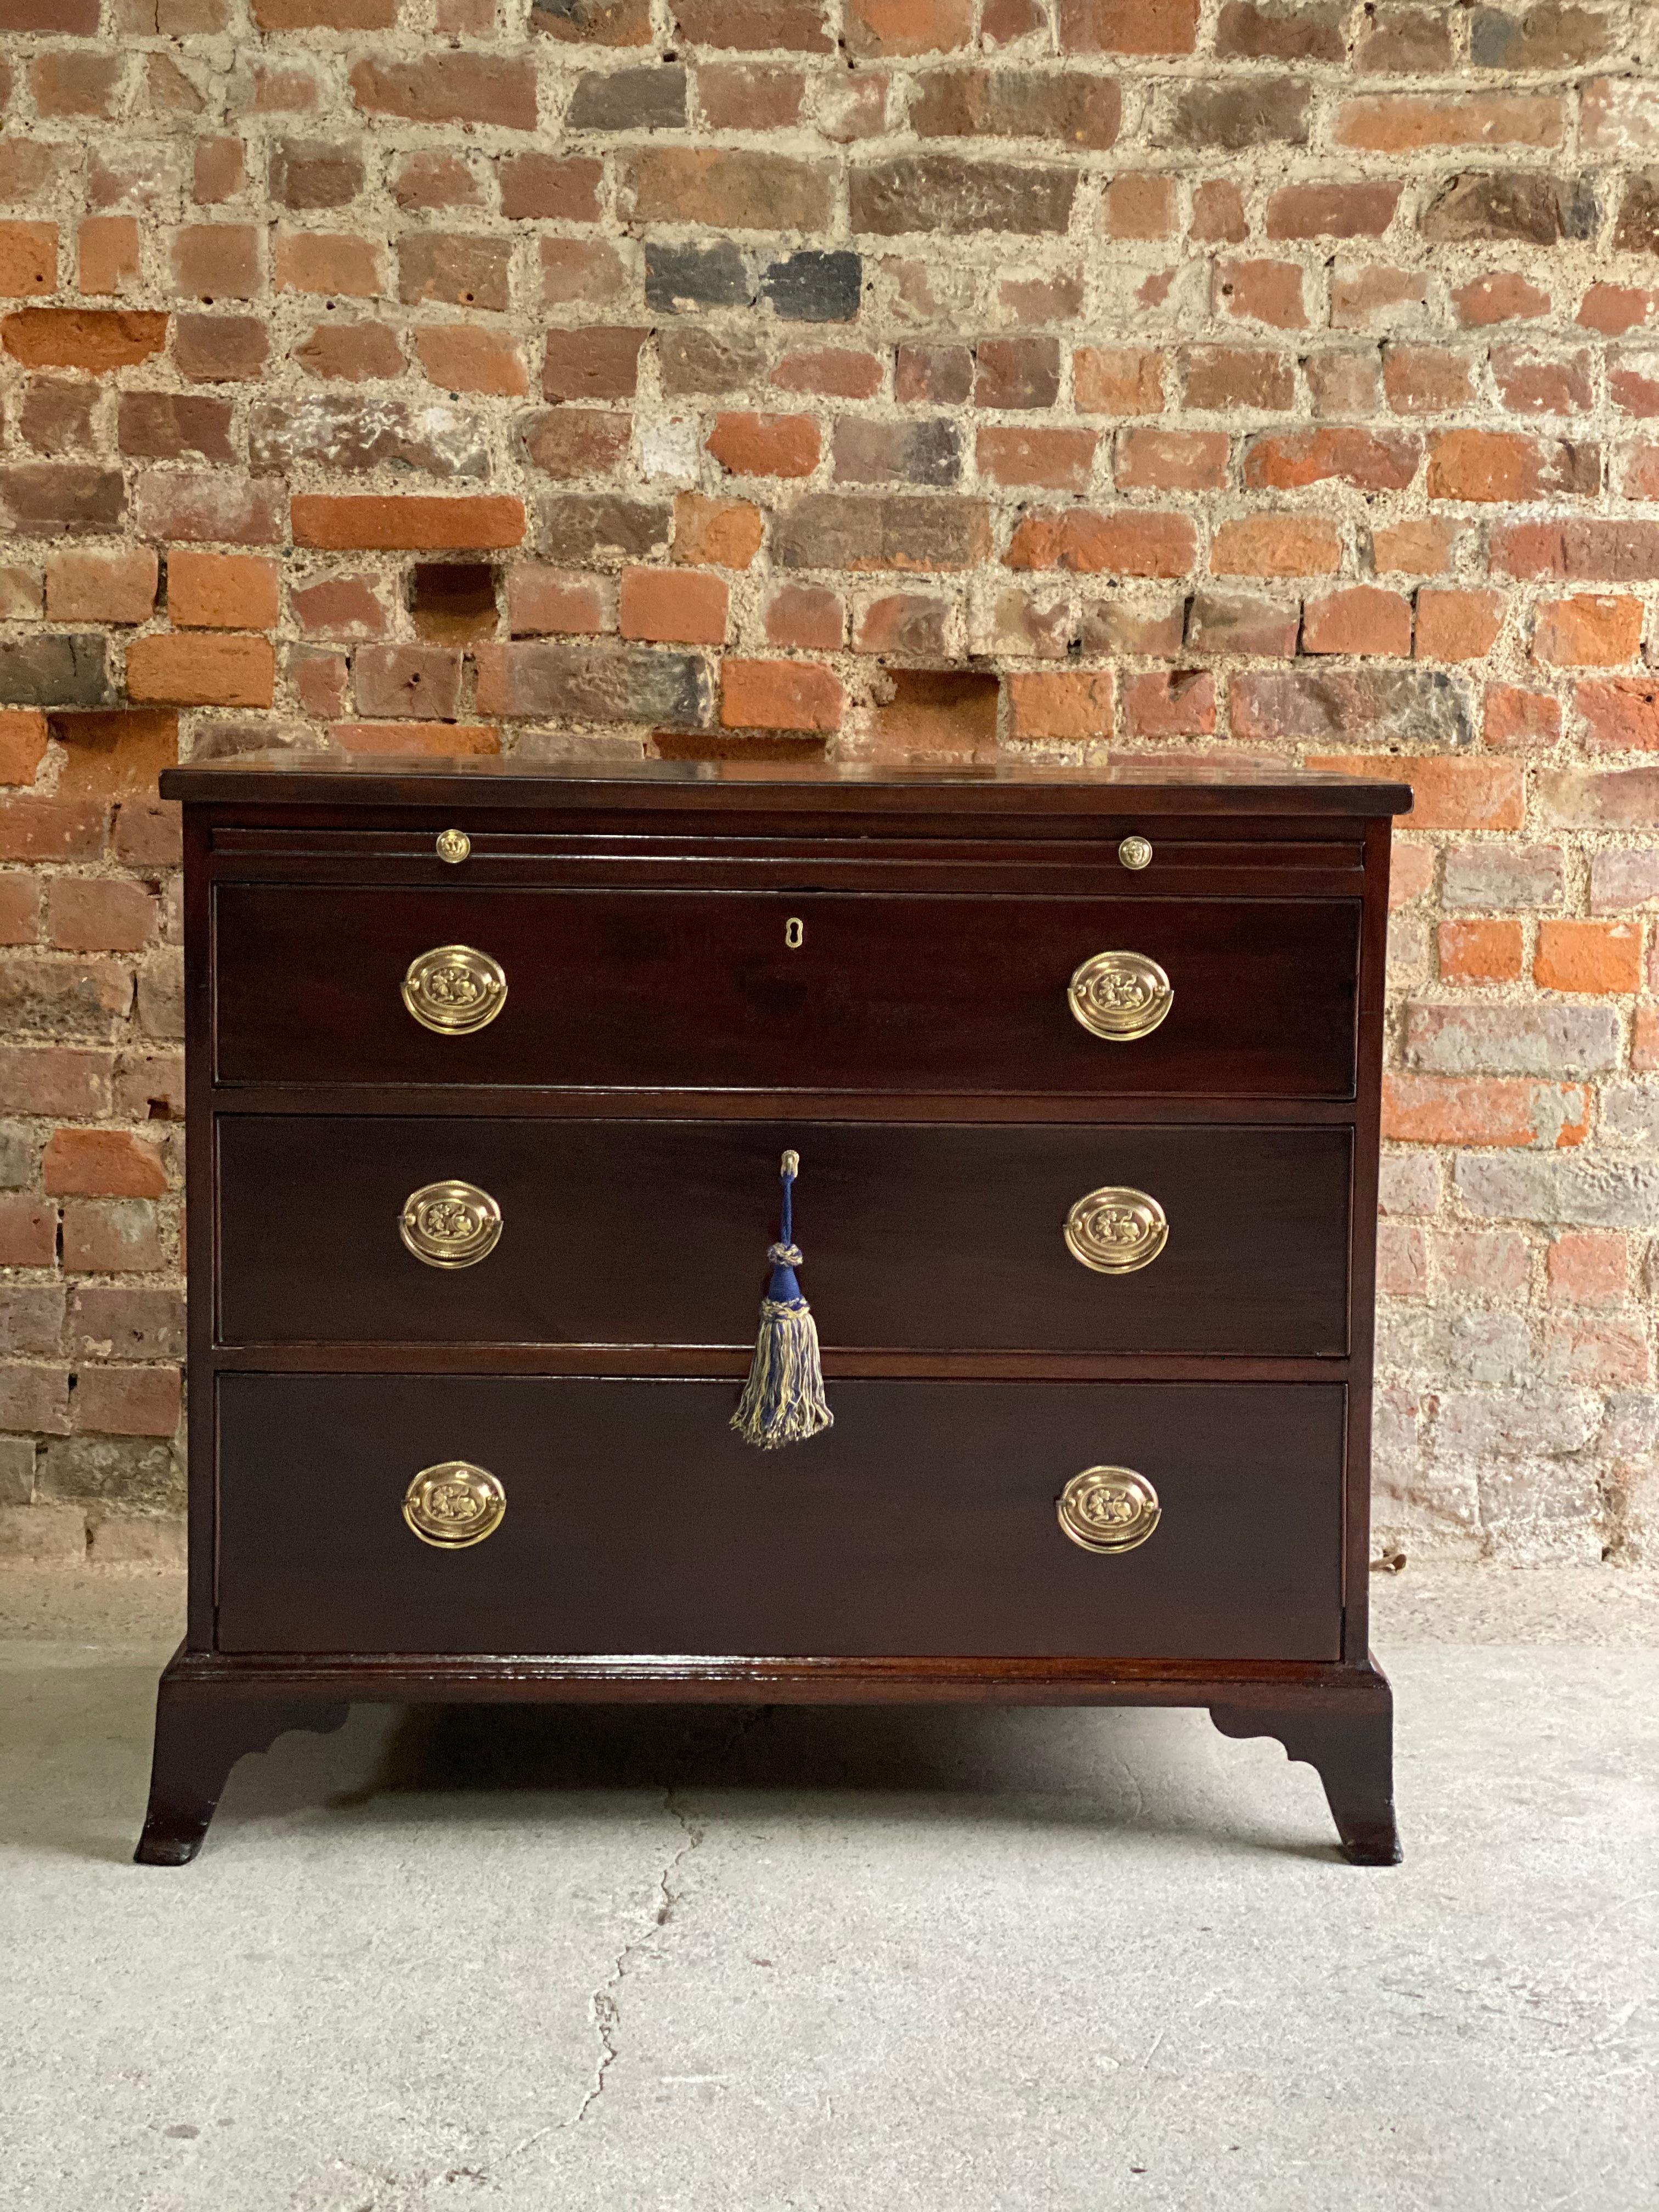 Antique George III mahogany bachelor’s chest of drawers, 19th century, circa 1830

Early 19th century George III mahogany bachelor’s chest of drawers circa 1830, the rectangular top with shaped moulded edge, over three graduated drawers with hand